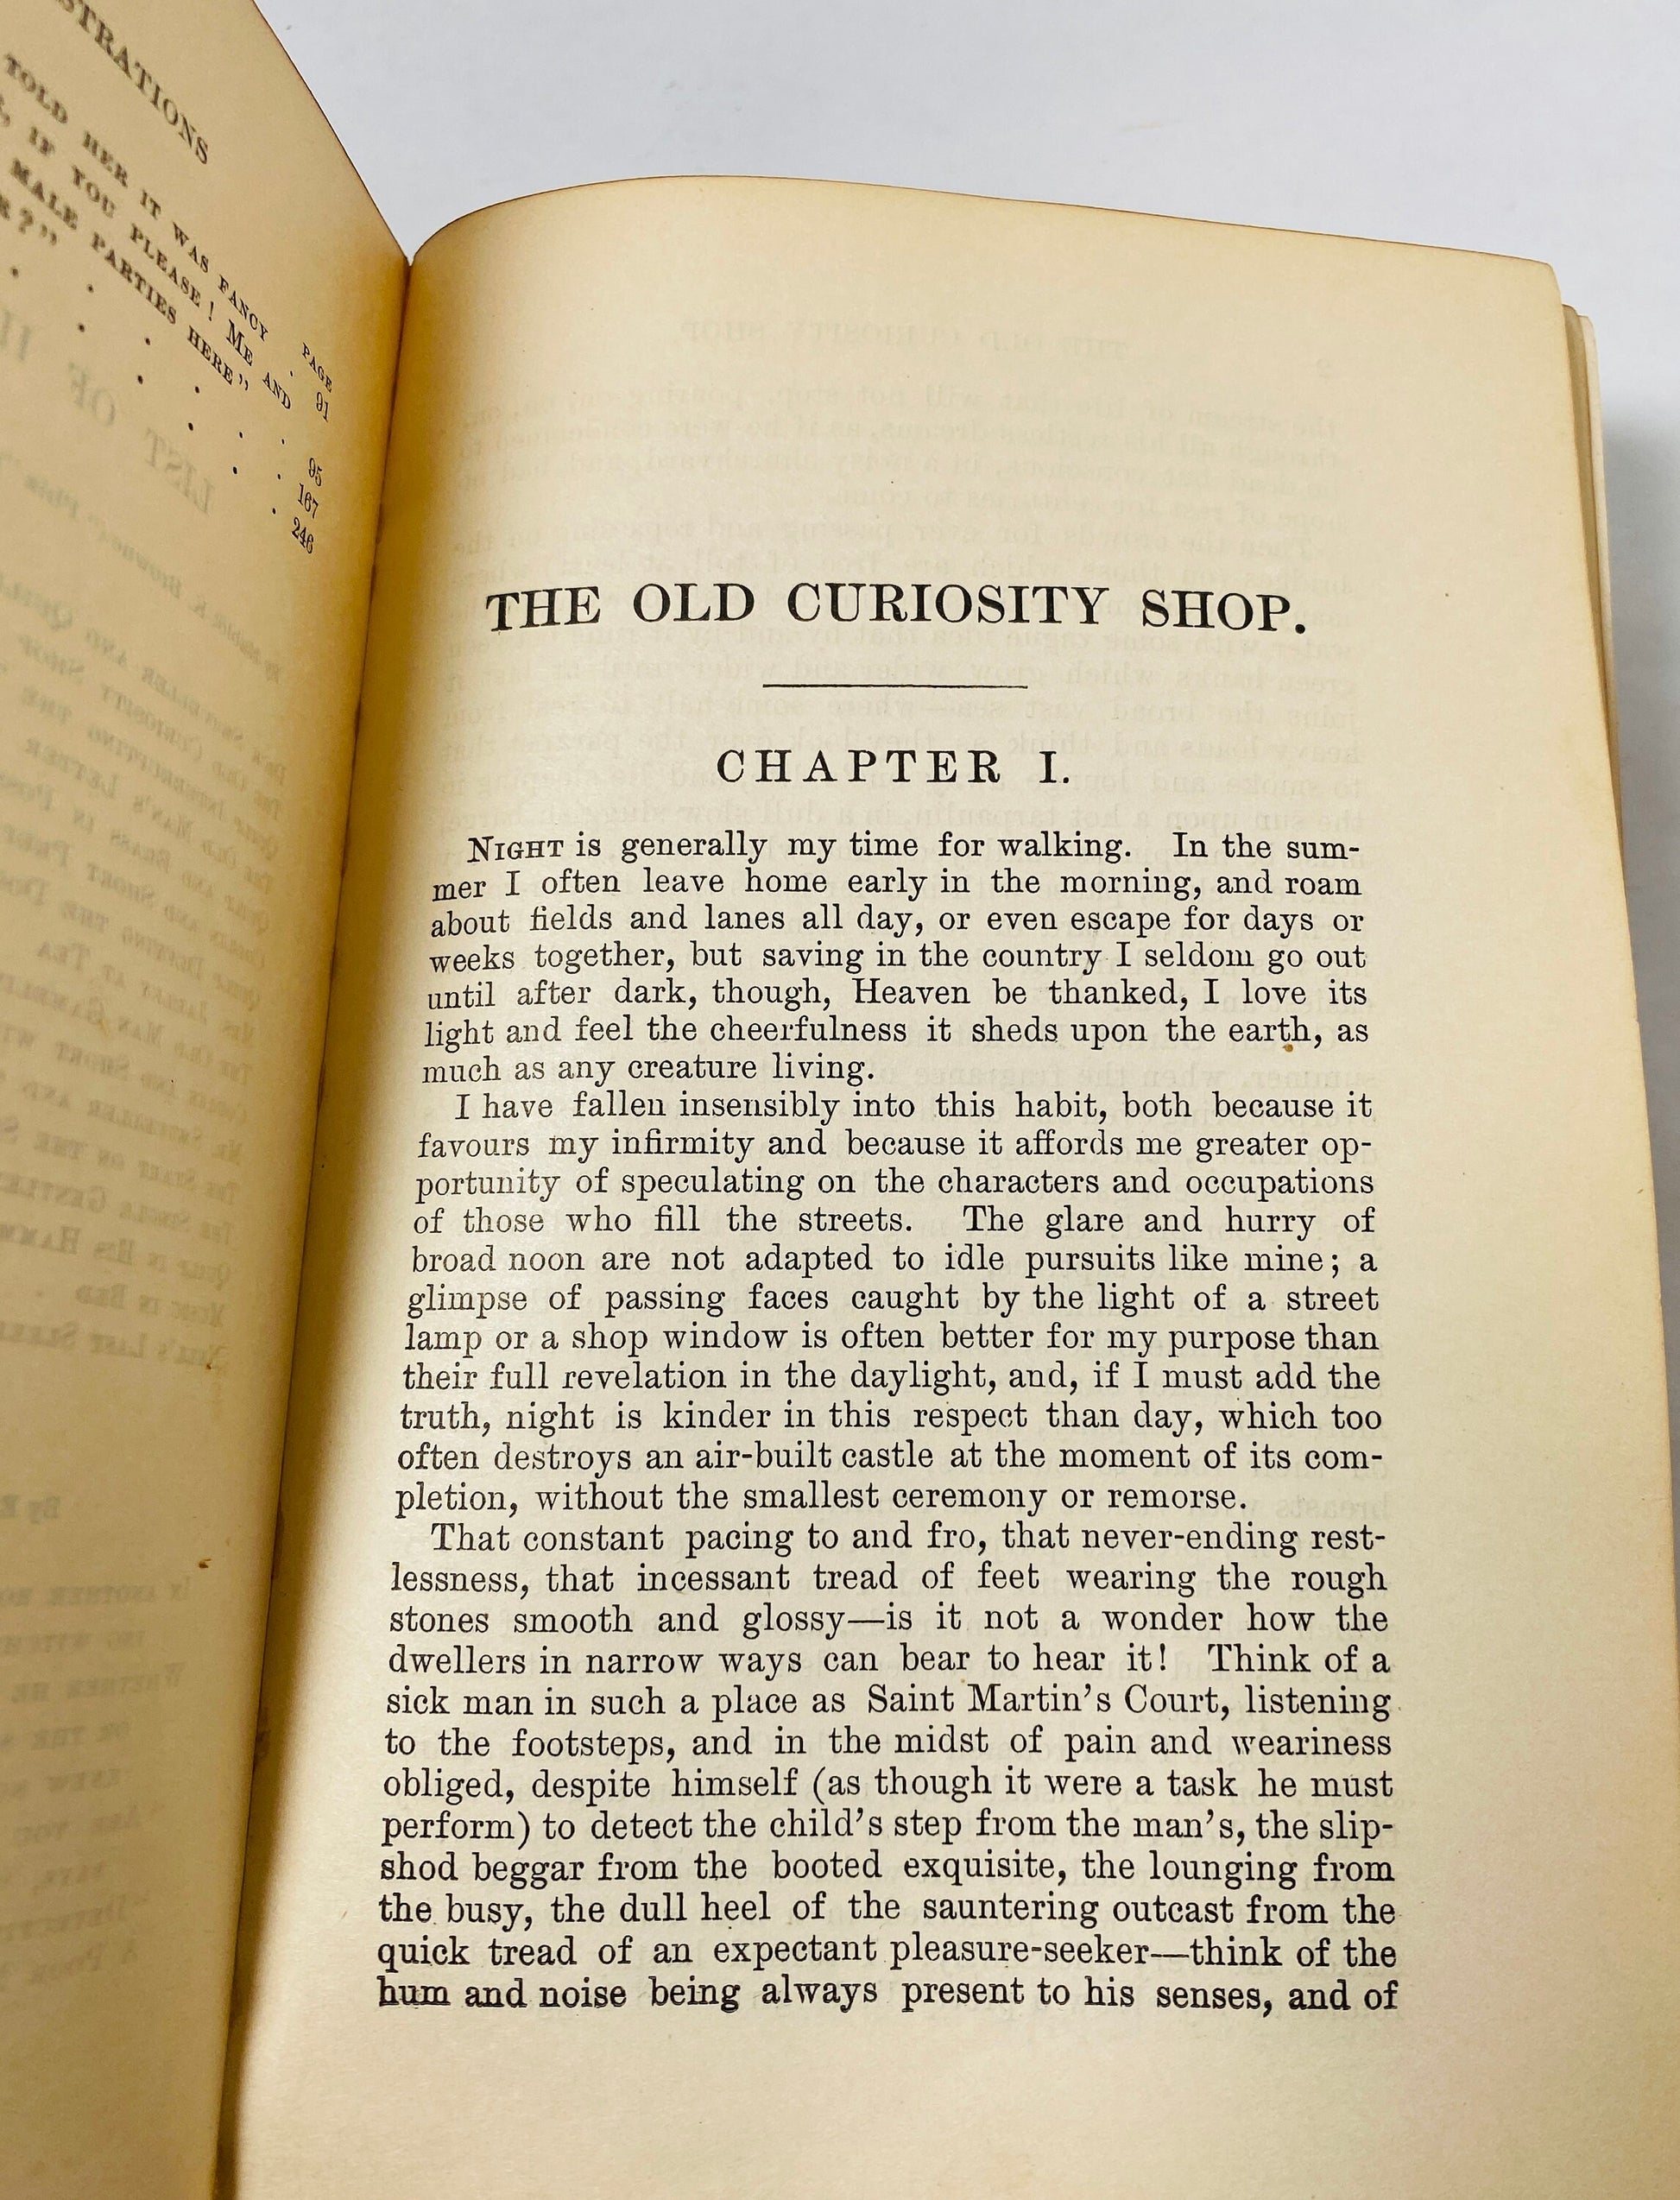 The Old Curiosity Shop vintage book by Charles Dickens circa 1912. Master Humphrey's Clock. Barnaby Rudge.